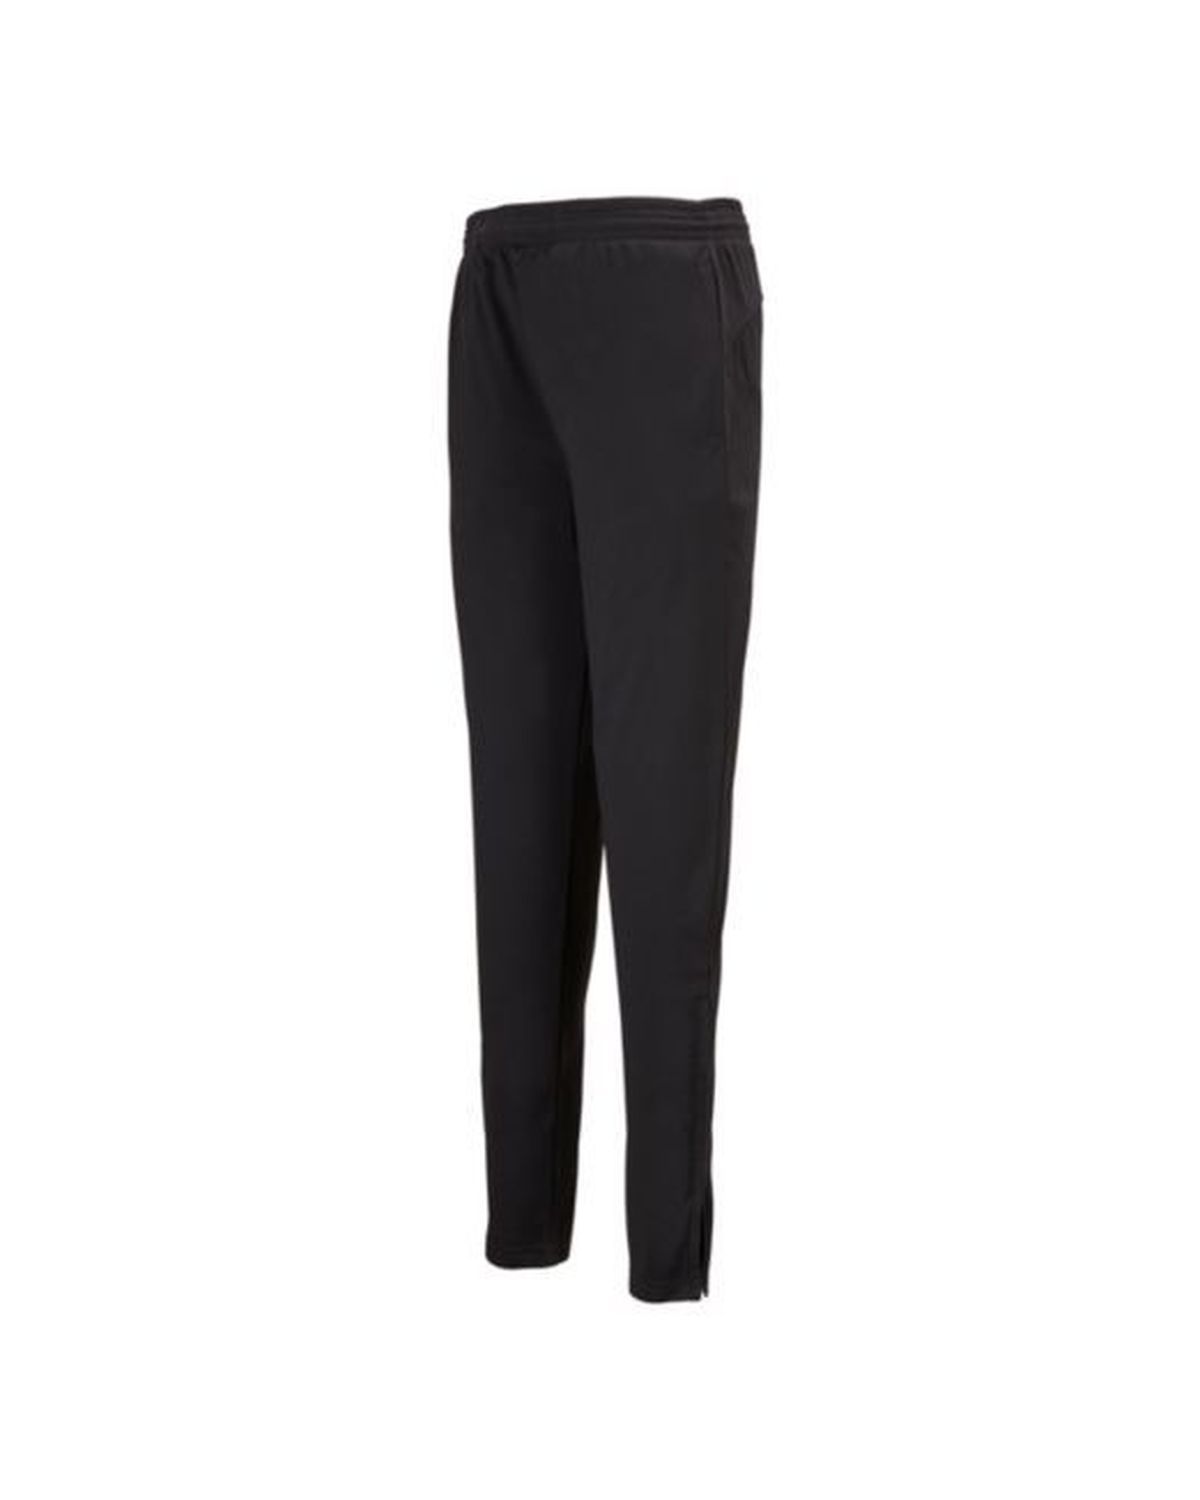 'Augusta Sportswear 7732 Youth Tapered Leg Pant'